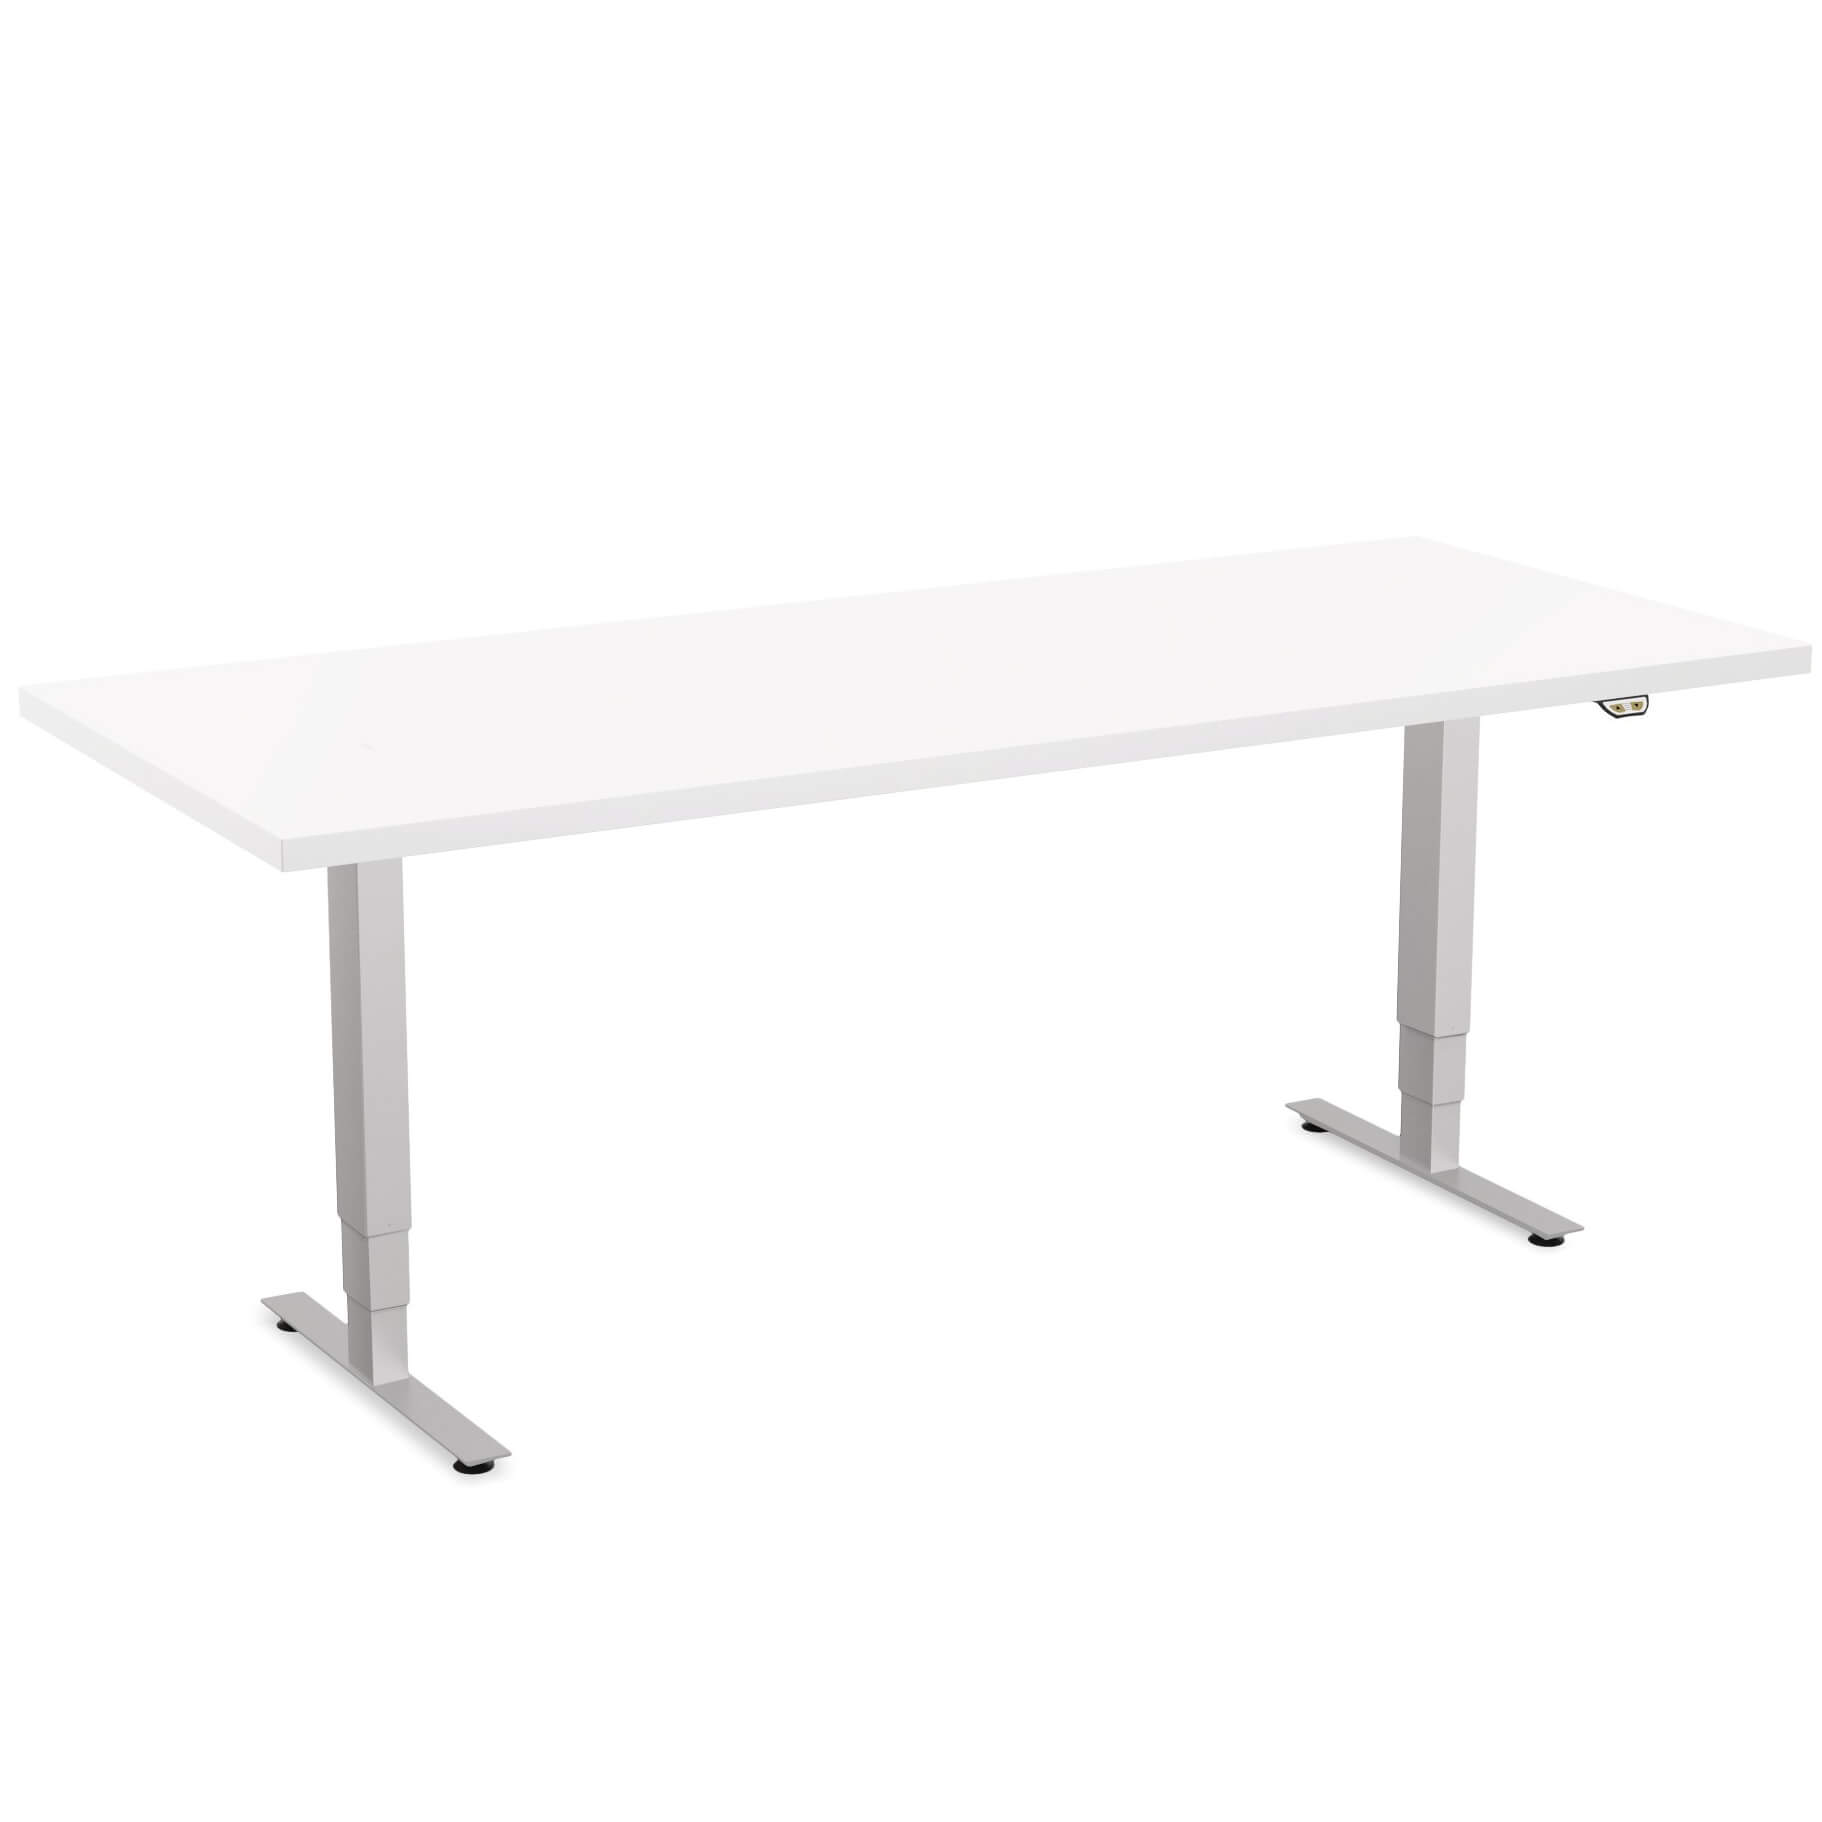 sit-stand-desk-height-adjustable-office-table.jpg